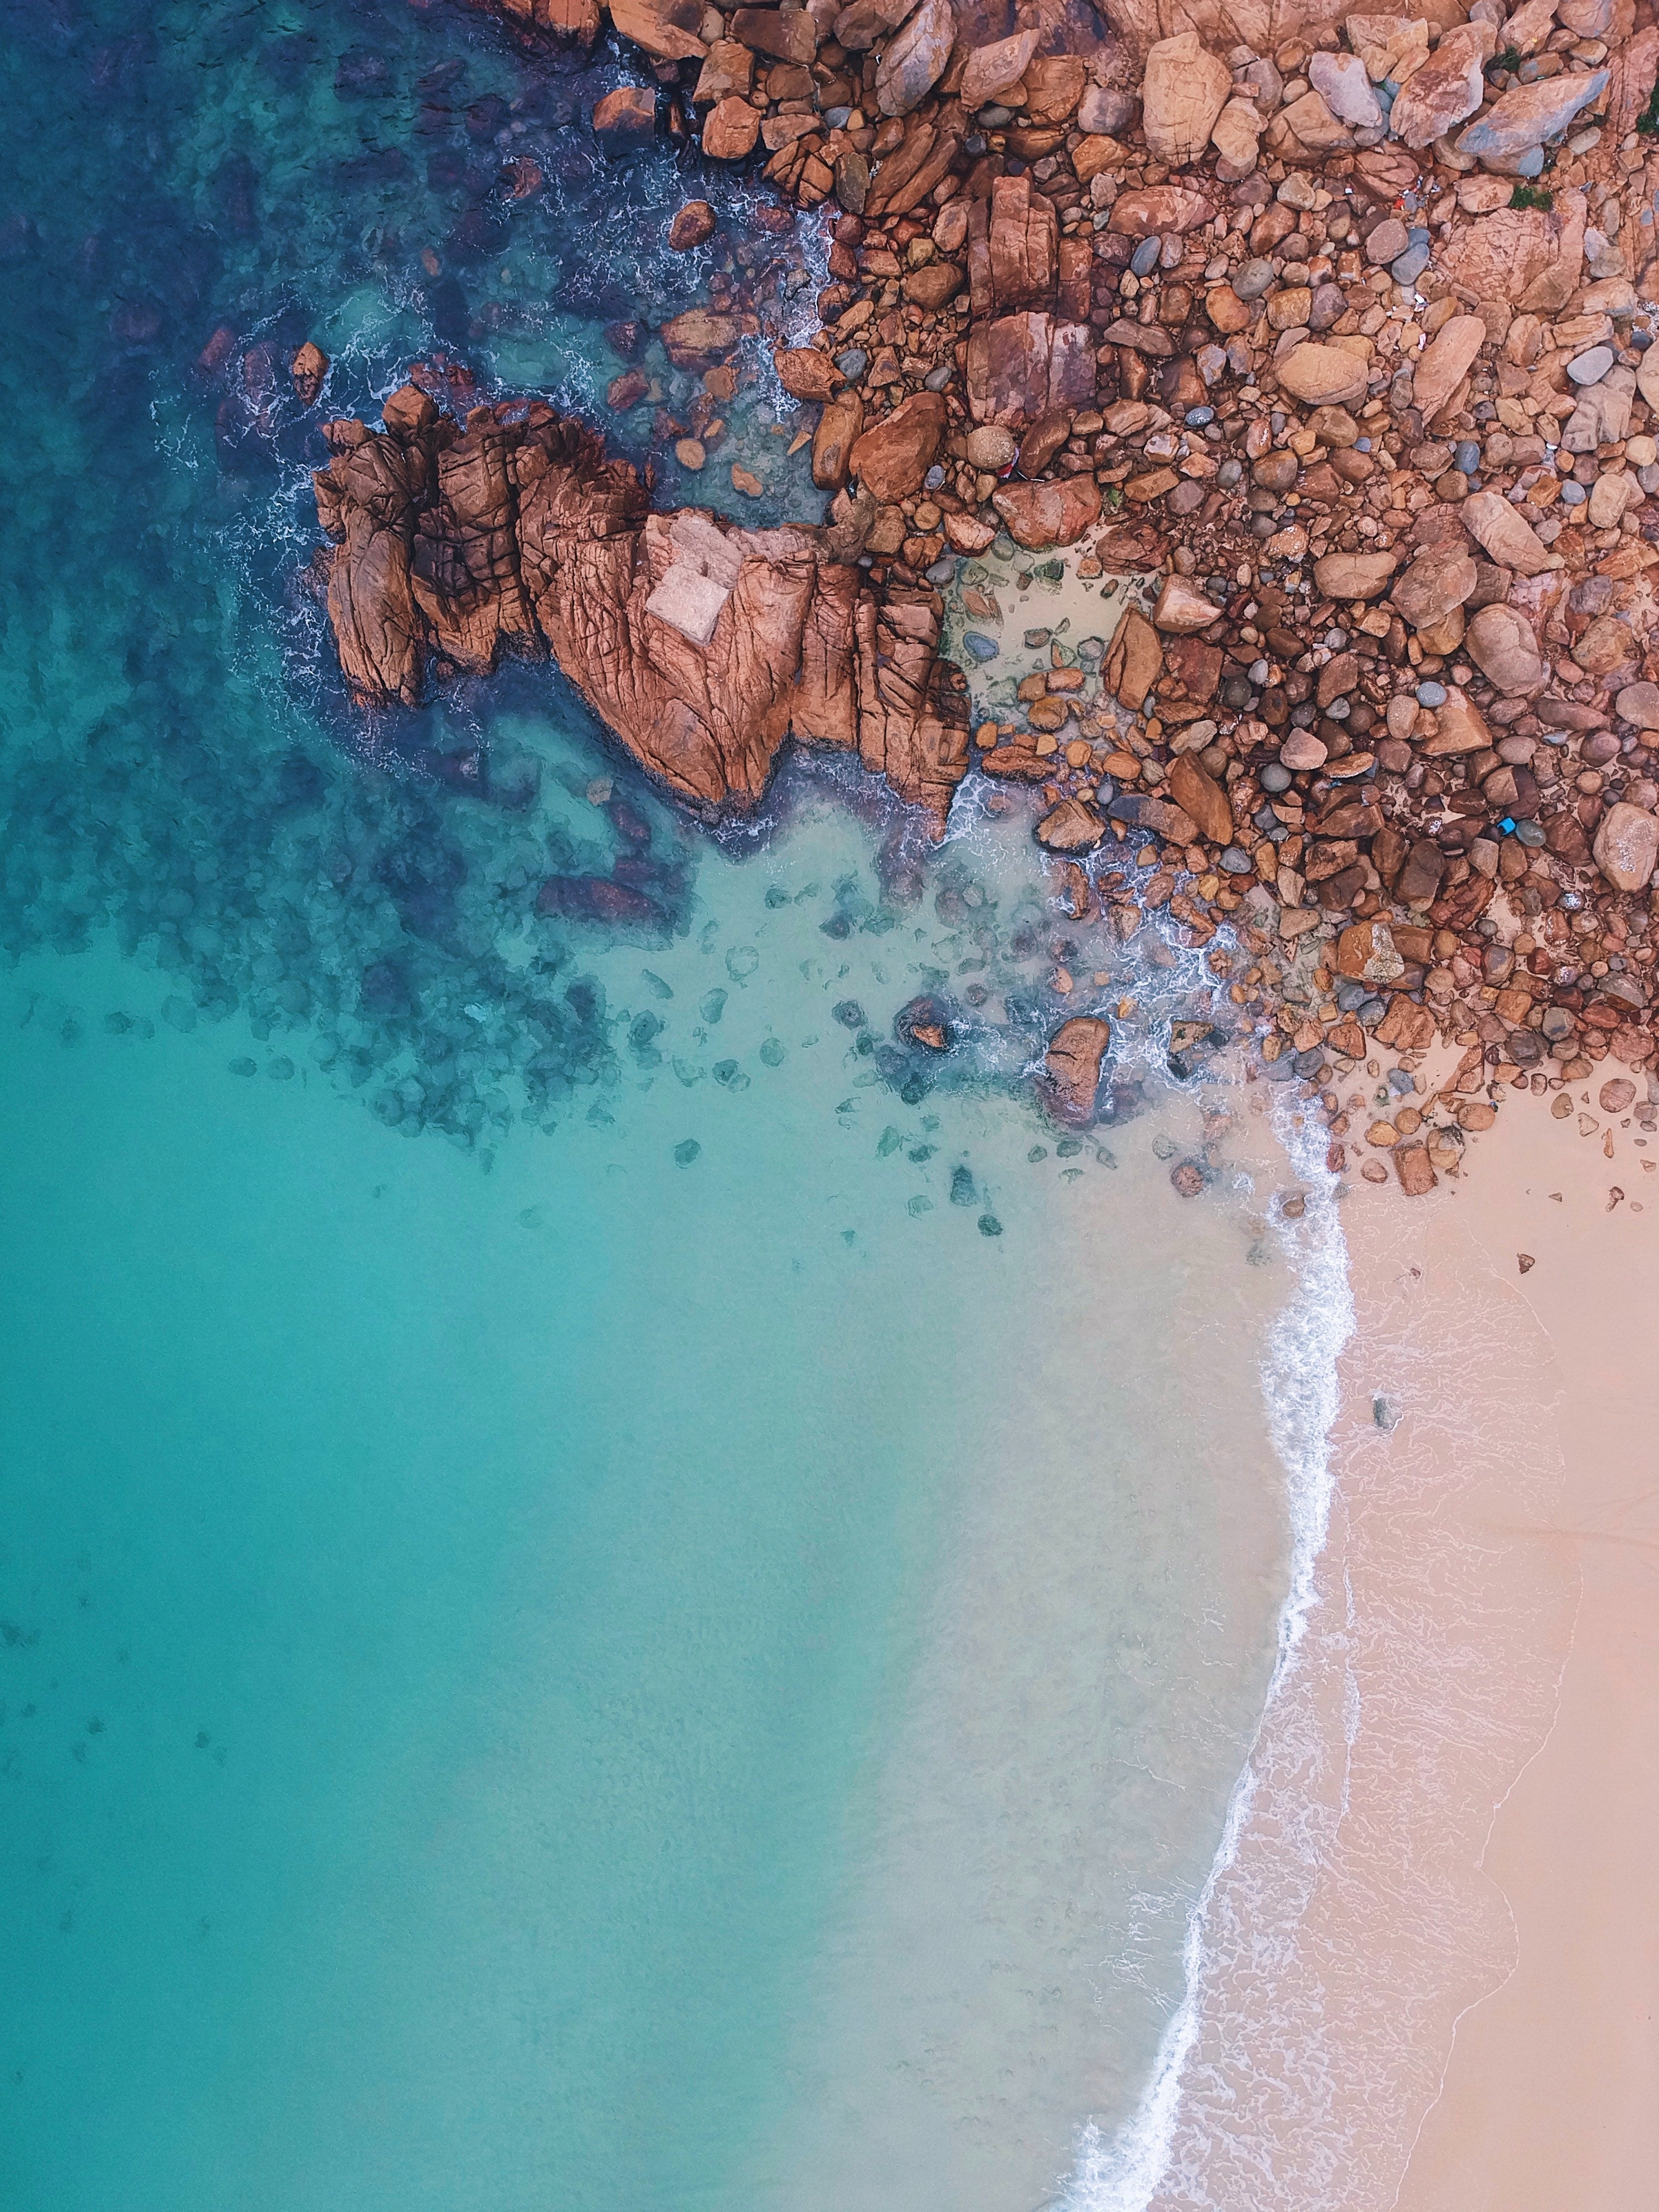 sand, view from above, stones, ocean, nature, water